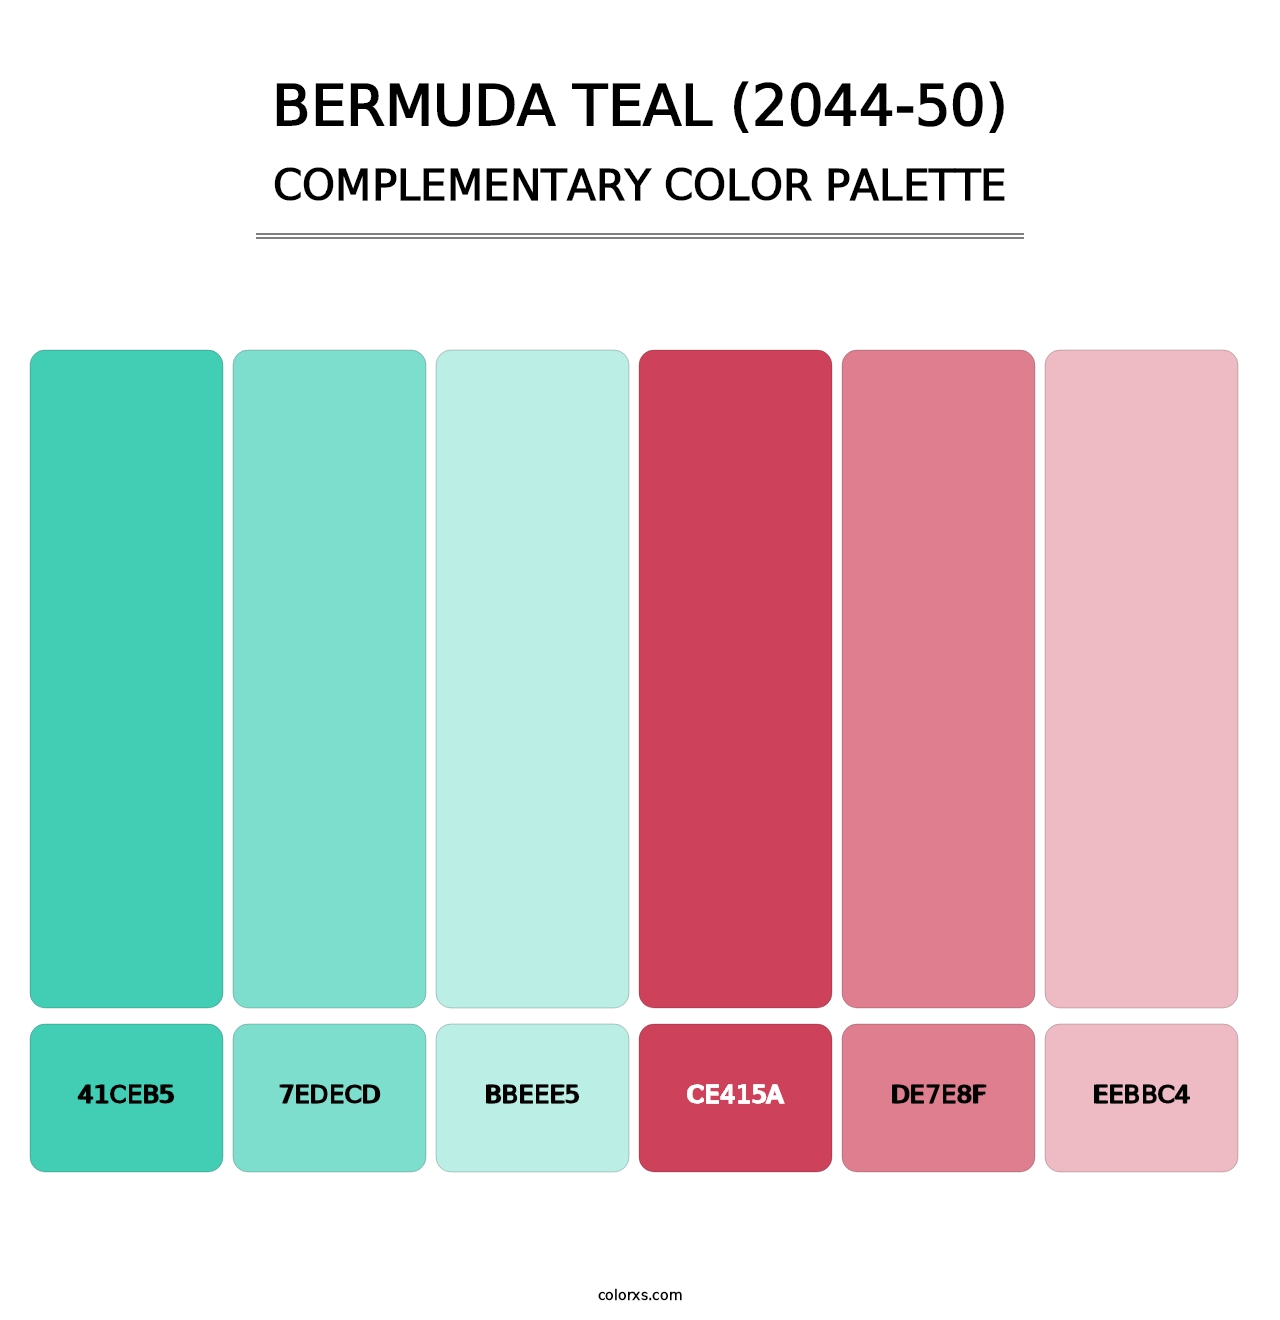 Bermuda Teal (2044-50) - Complementary Color Palette